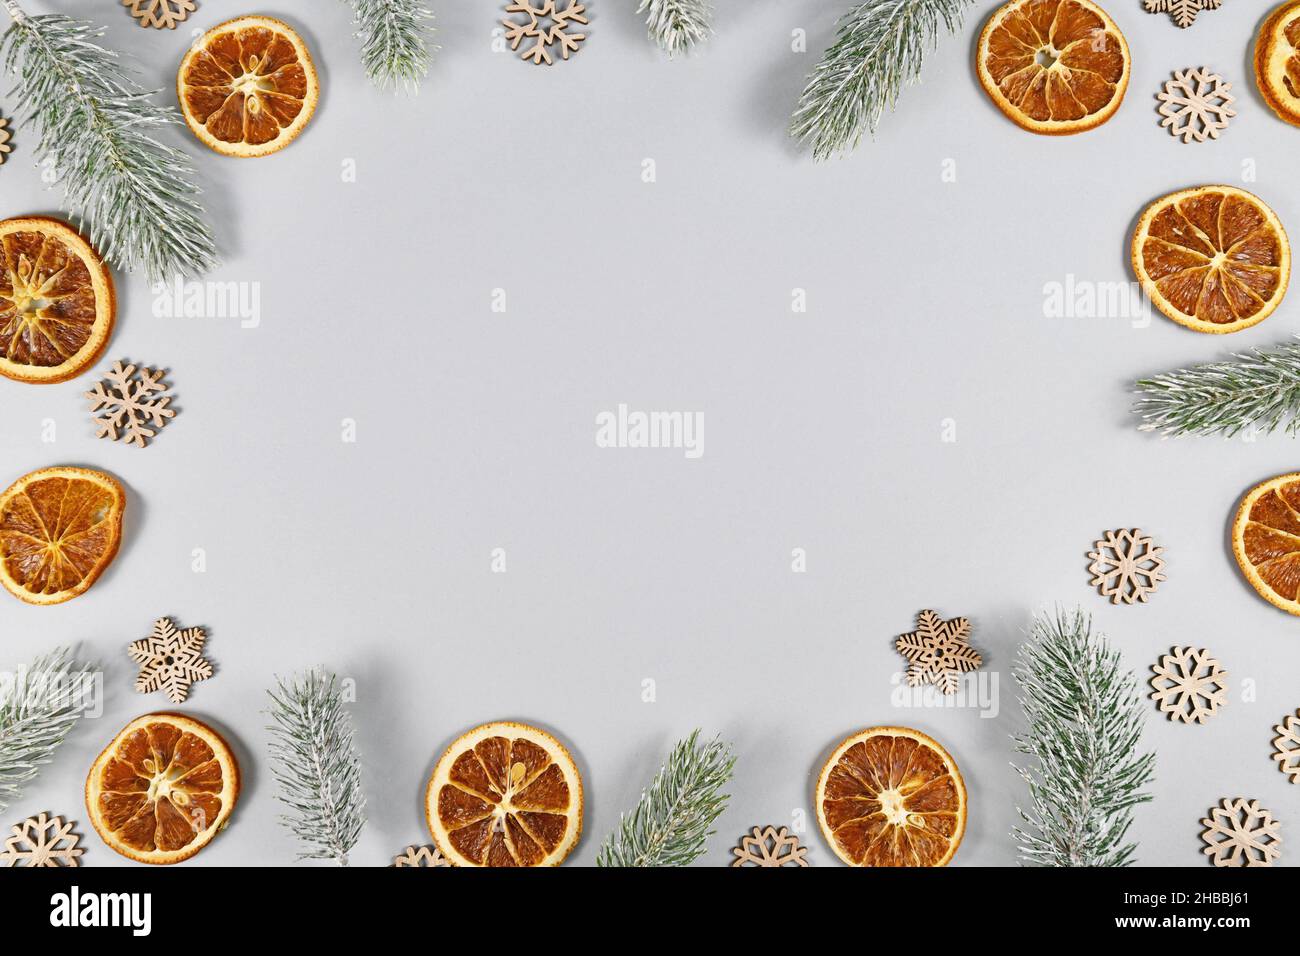 Frame with winter fir branches, dried orange slices and snowflakes on gray background with copy space Stock Photo